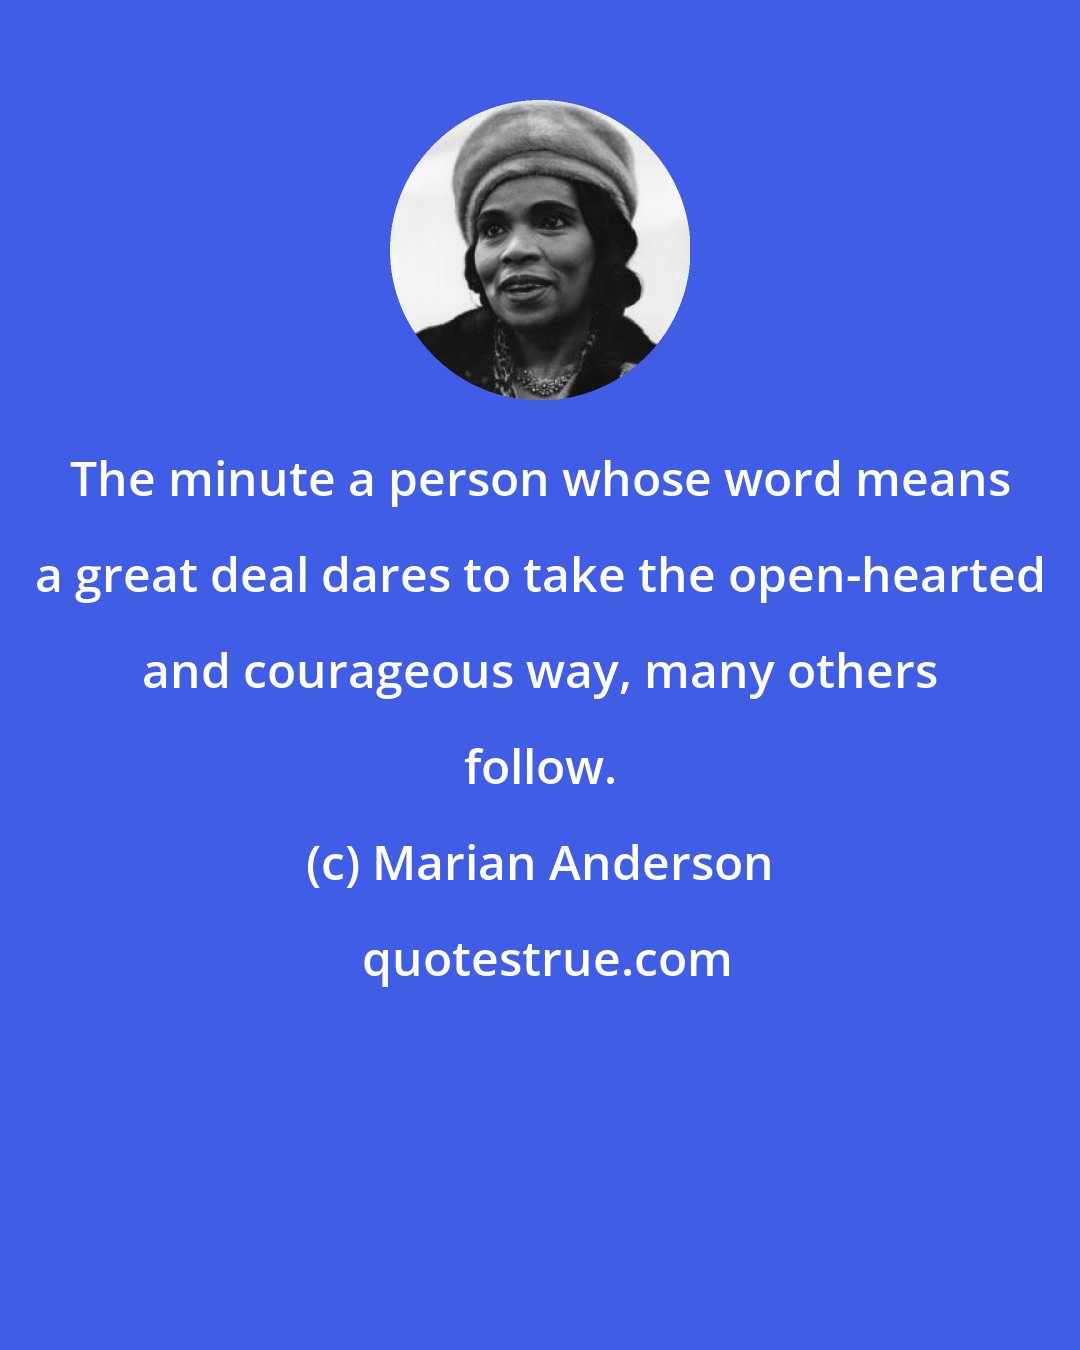 Marian Anderson: The minute a person whose word means a great deal dares to take the open-hearted and courageous way, many others follow.